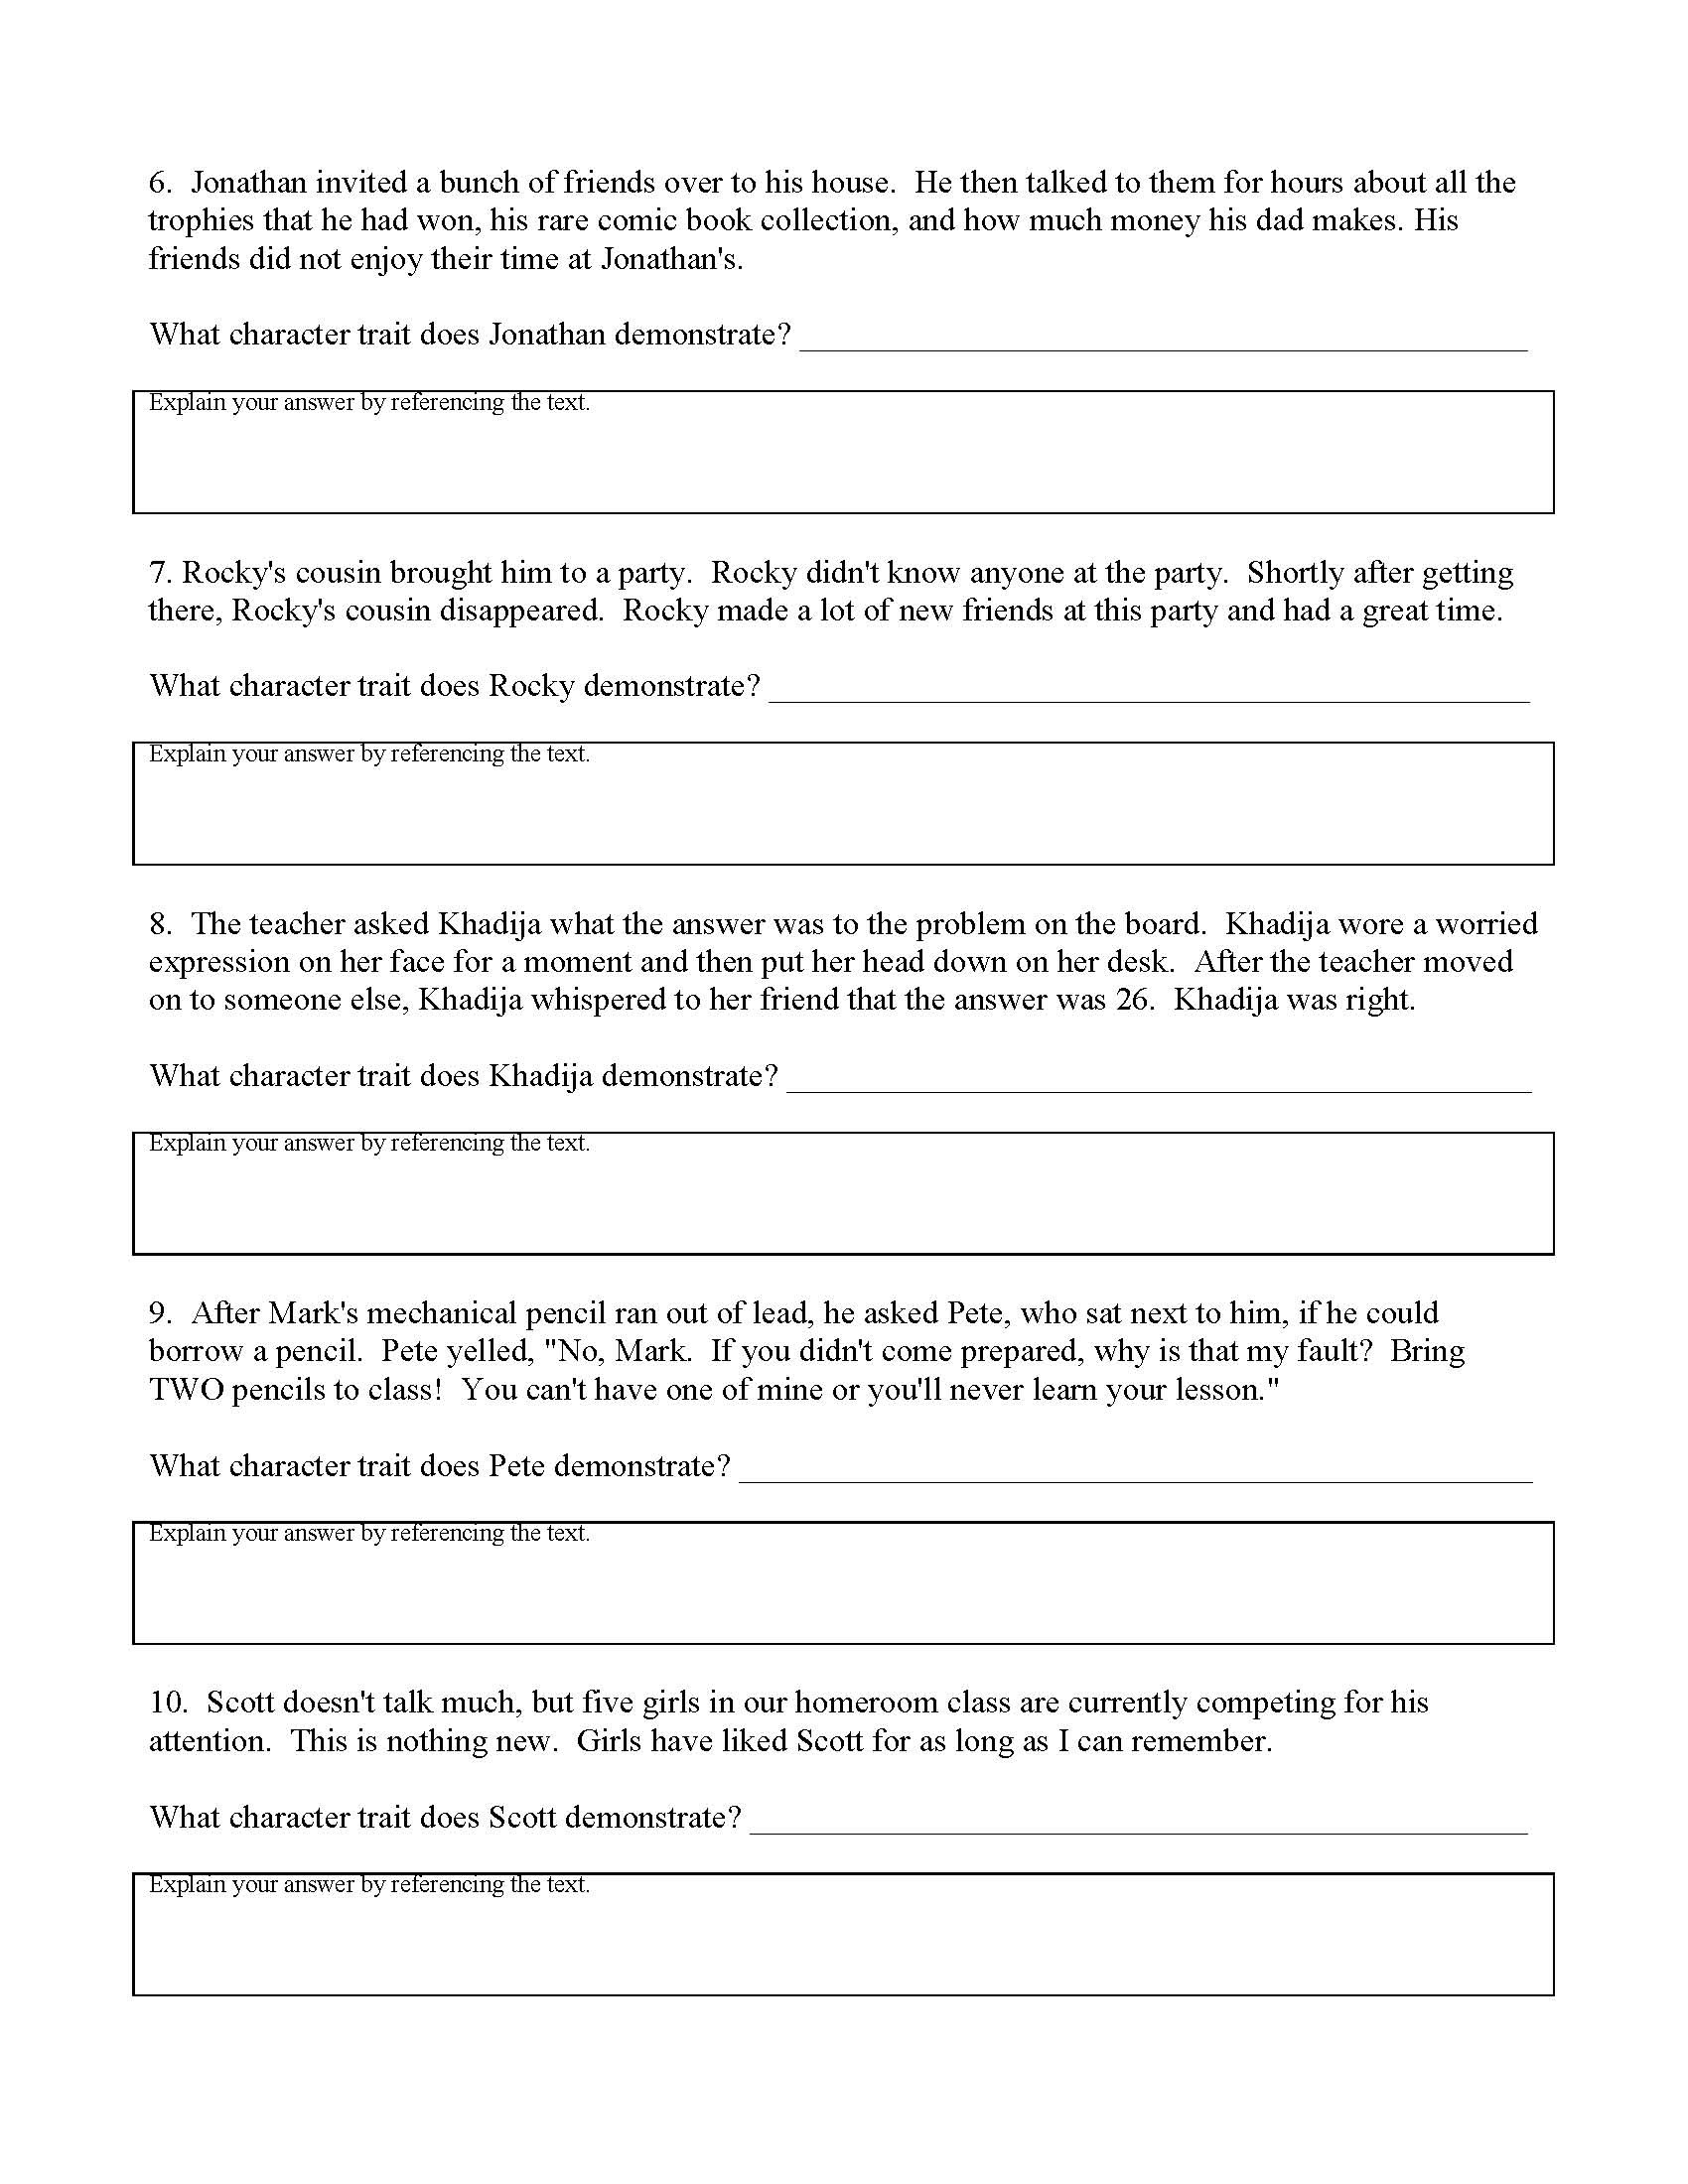 Direct and Indirect Characterization Worksheet Indirect Character Traits Worksheet Answers